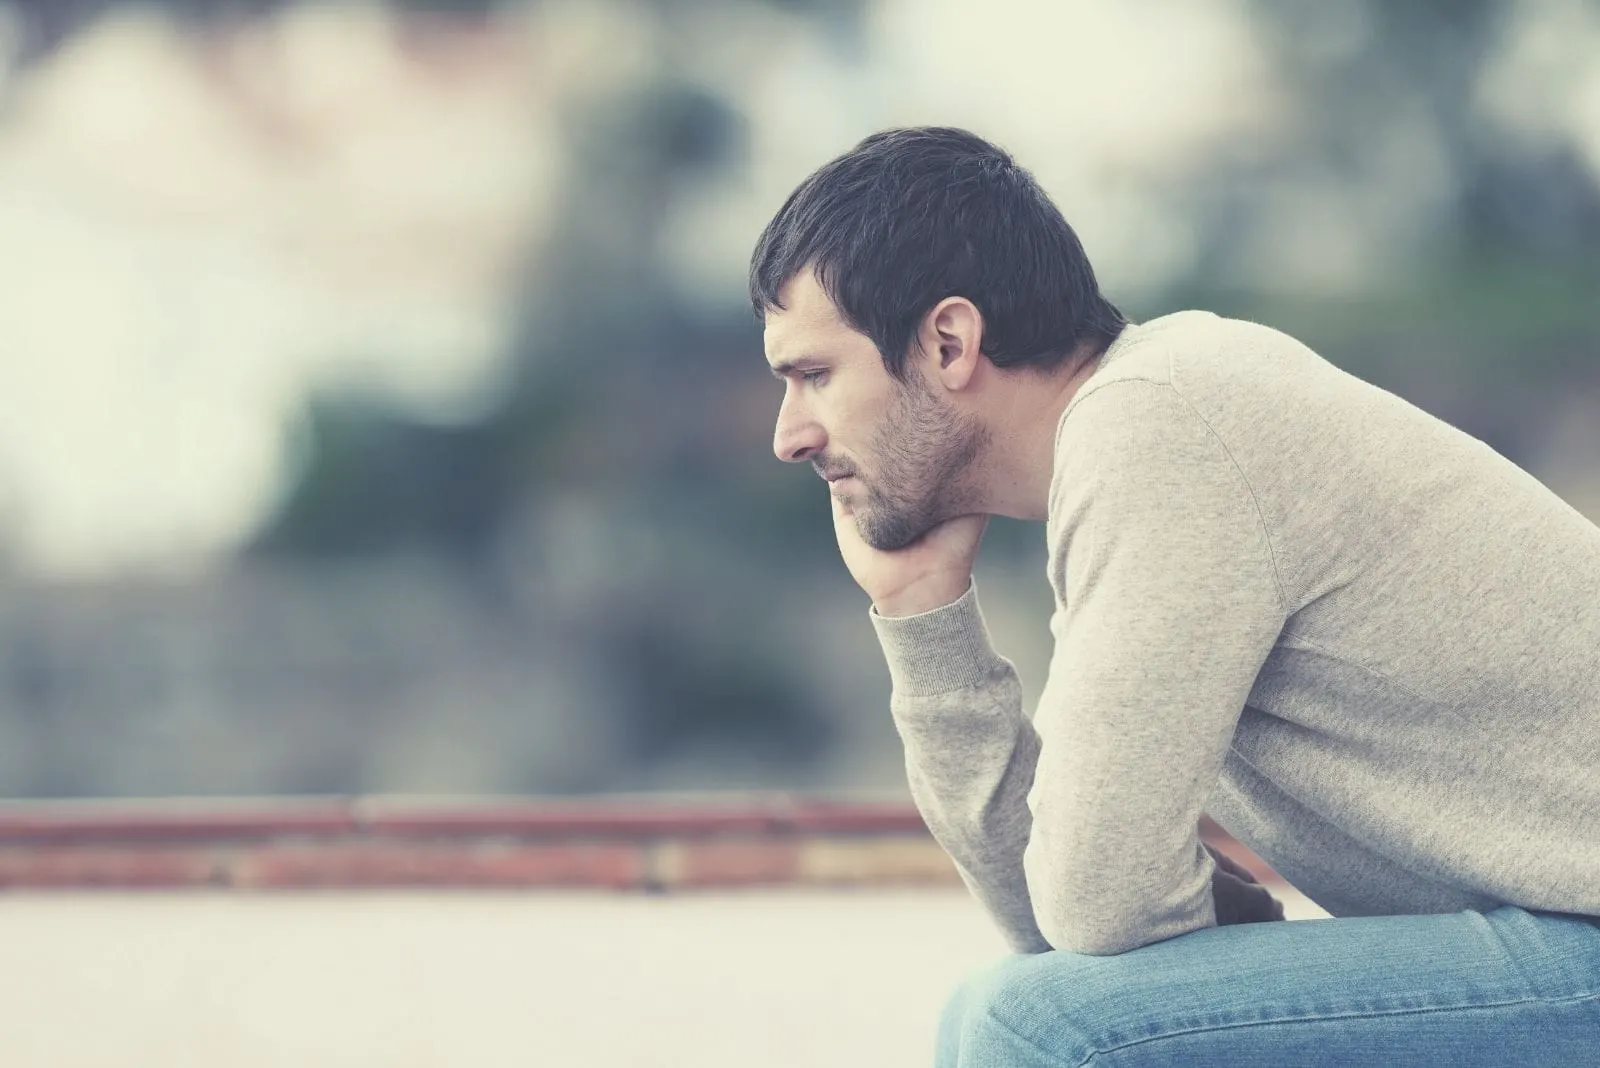 pensive worried man sitting outdoors with head leaning on his hand